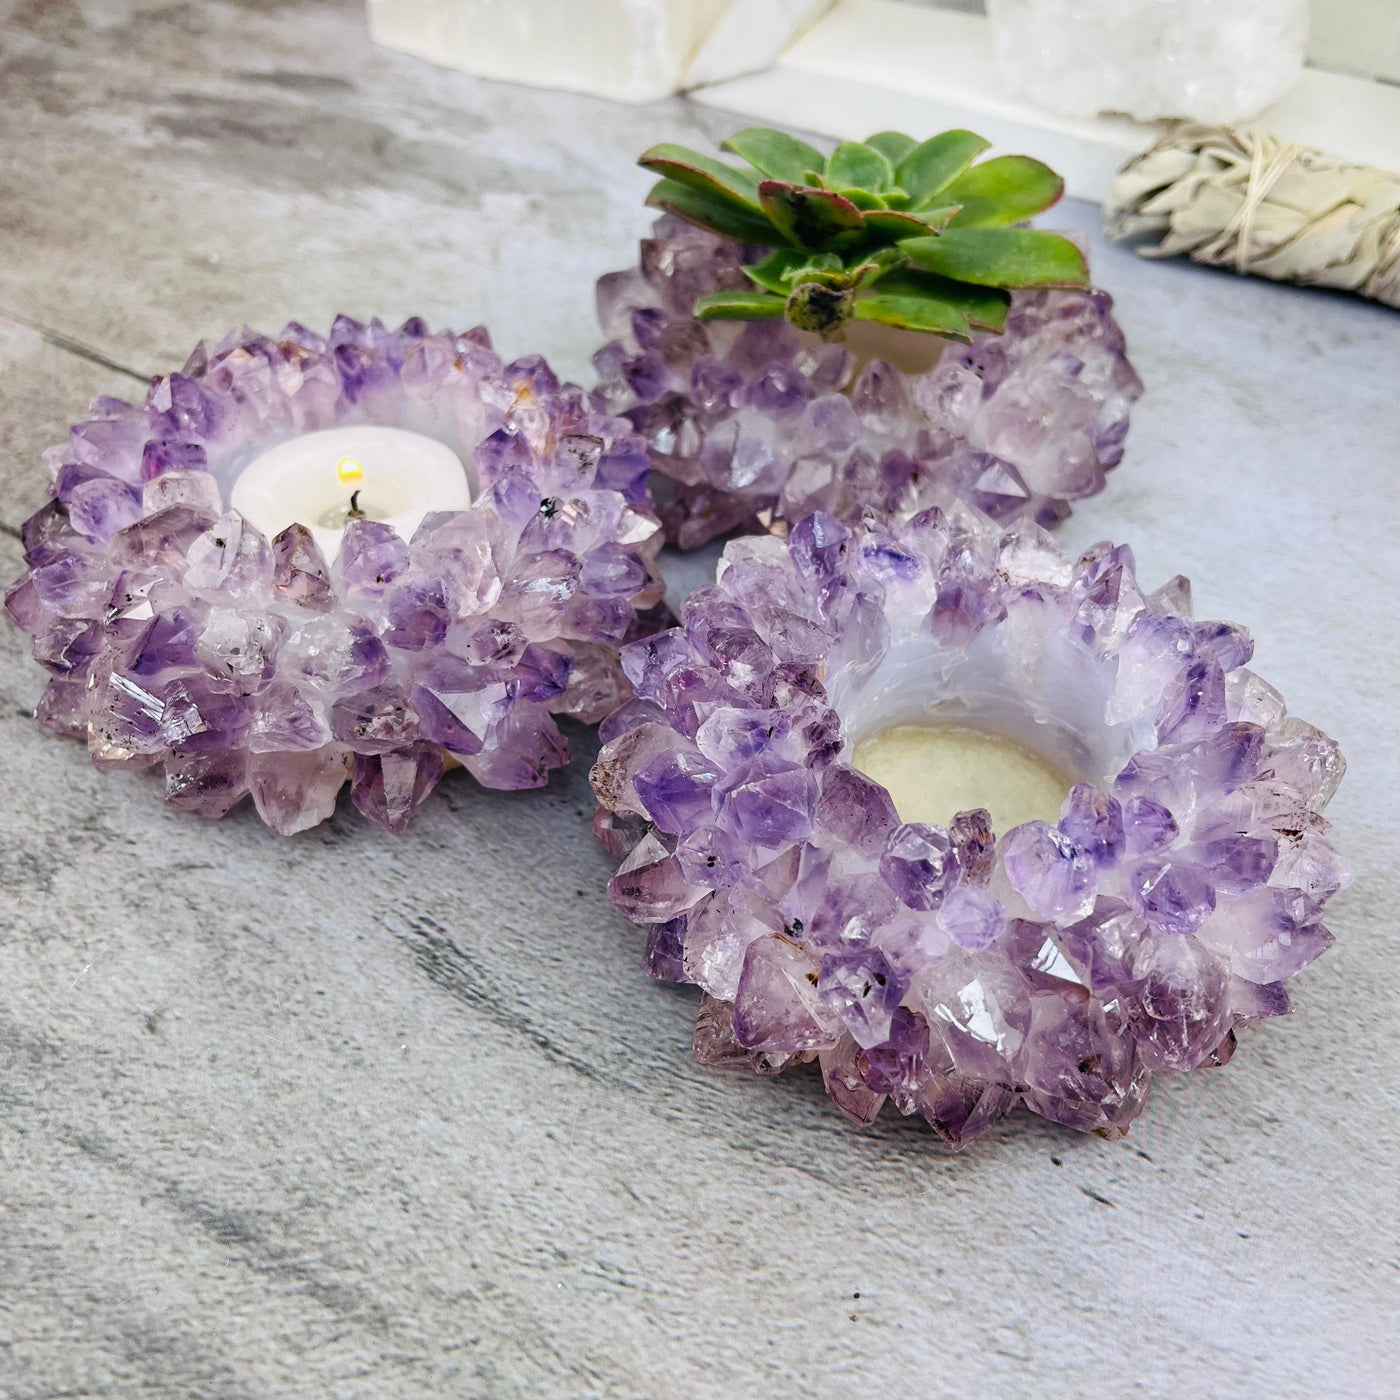 Amethyst Point Candle Holder -  "B" Quality